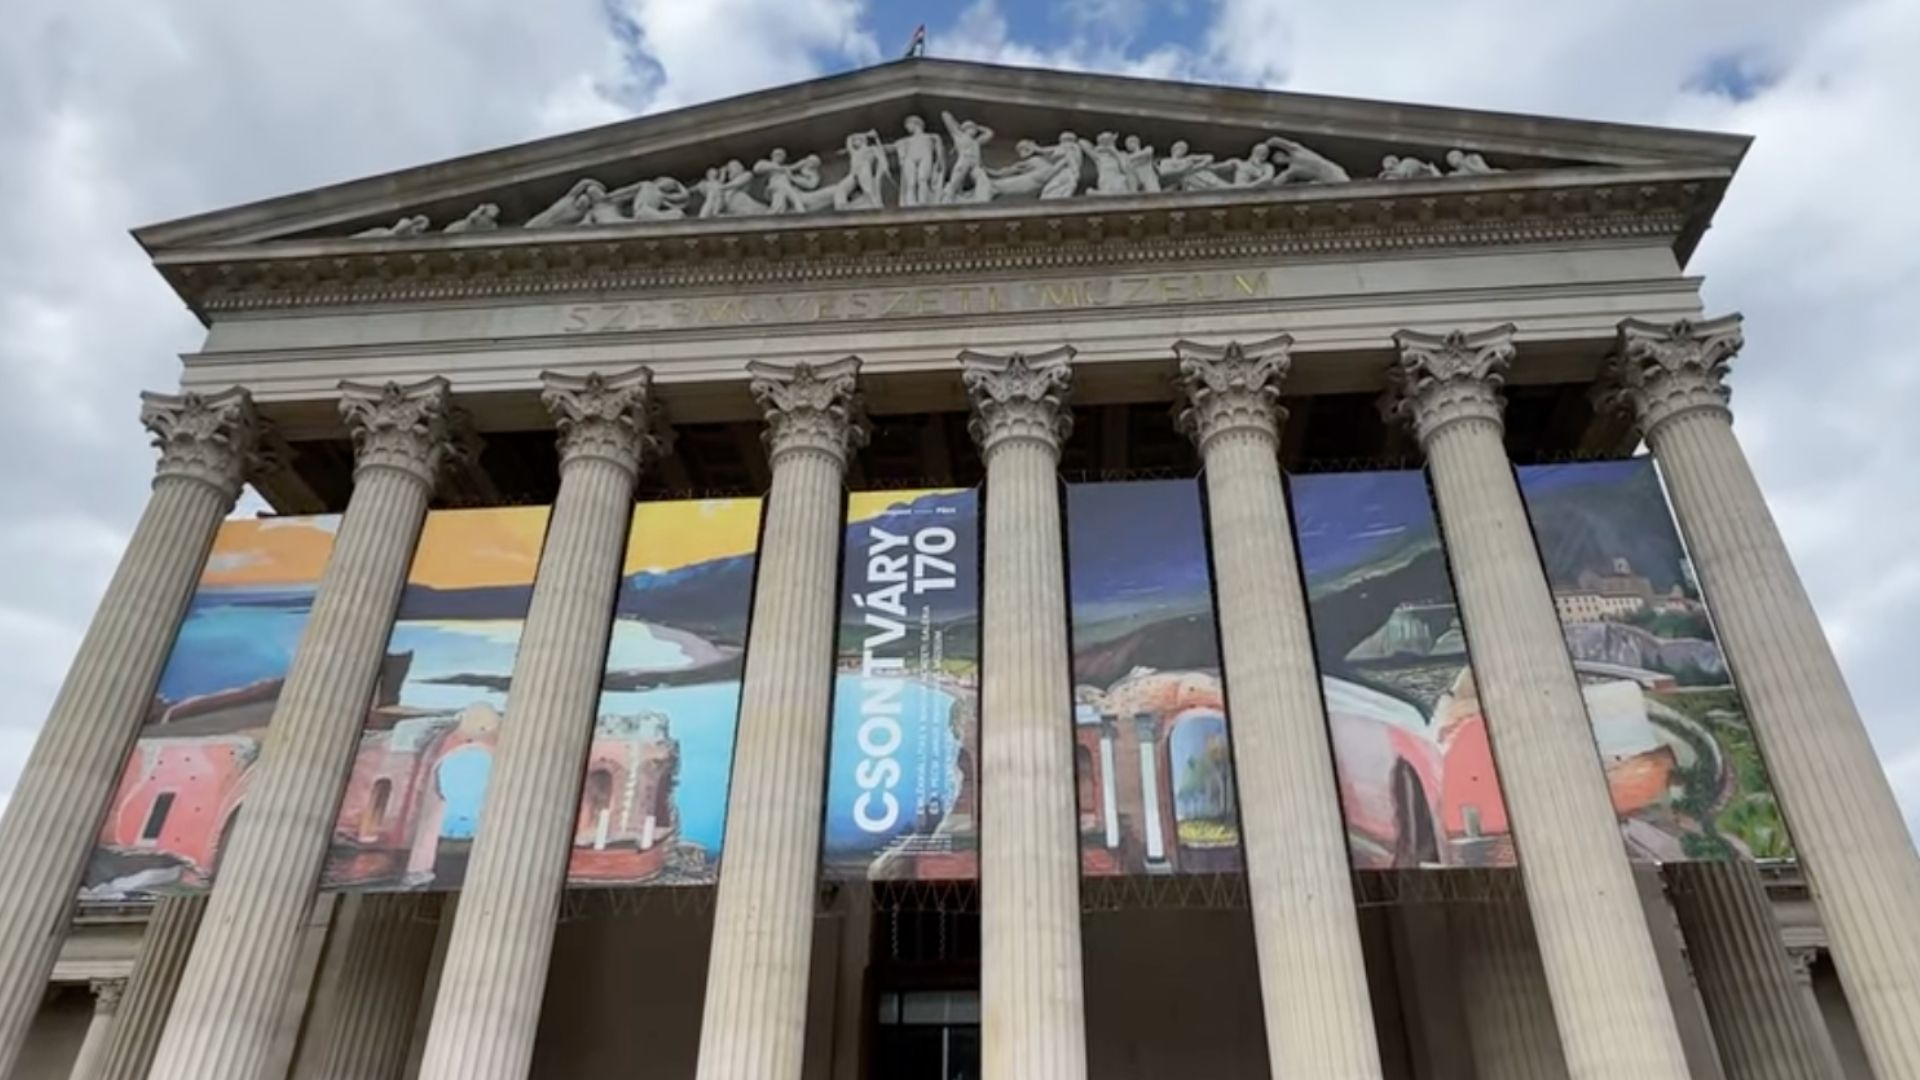 Front view of the Museum of Fine Arts in Budapest, Hungary, with colorful banners and columns.